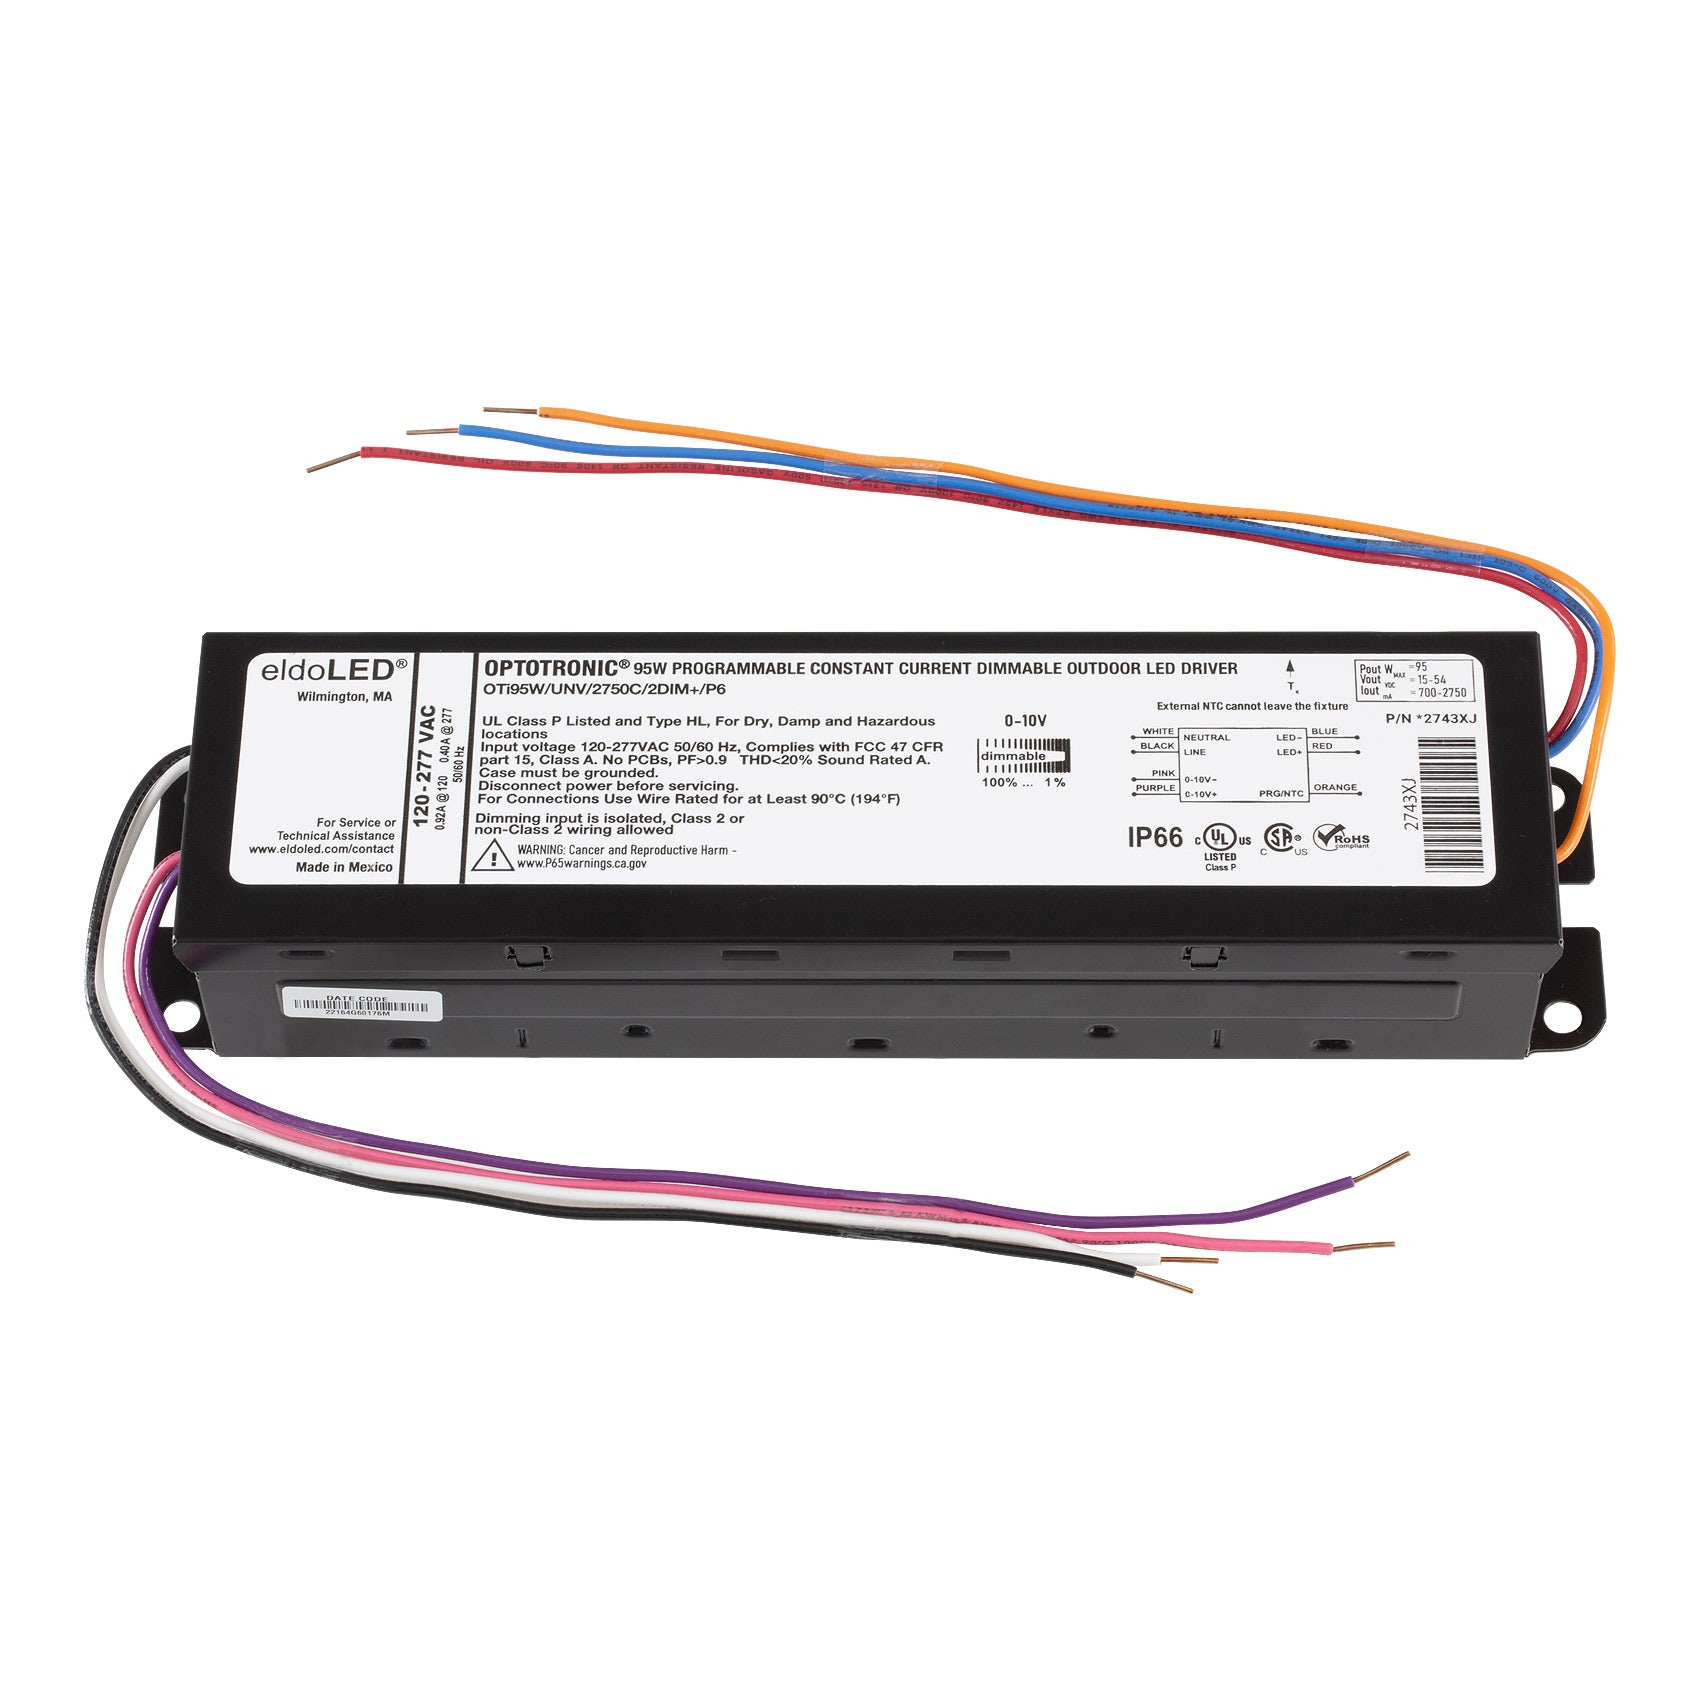 eldoLED *2743XJ OPTOTRONIC 95W Constant Current 0-10V Dimmable LED Driver,  Programmable Outdoor OTi95W/UNV/2750C/2DIM+/P6 (Osram 57509)